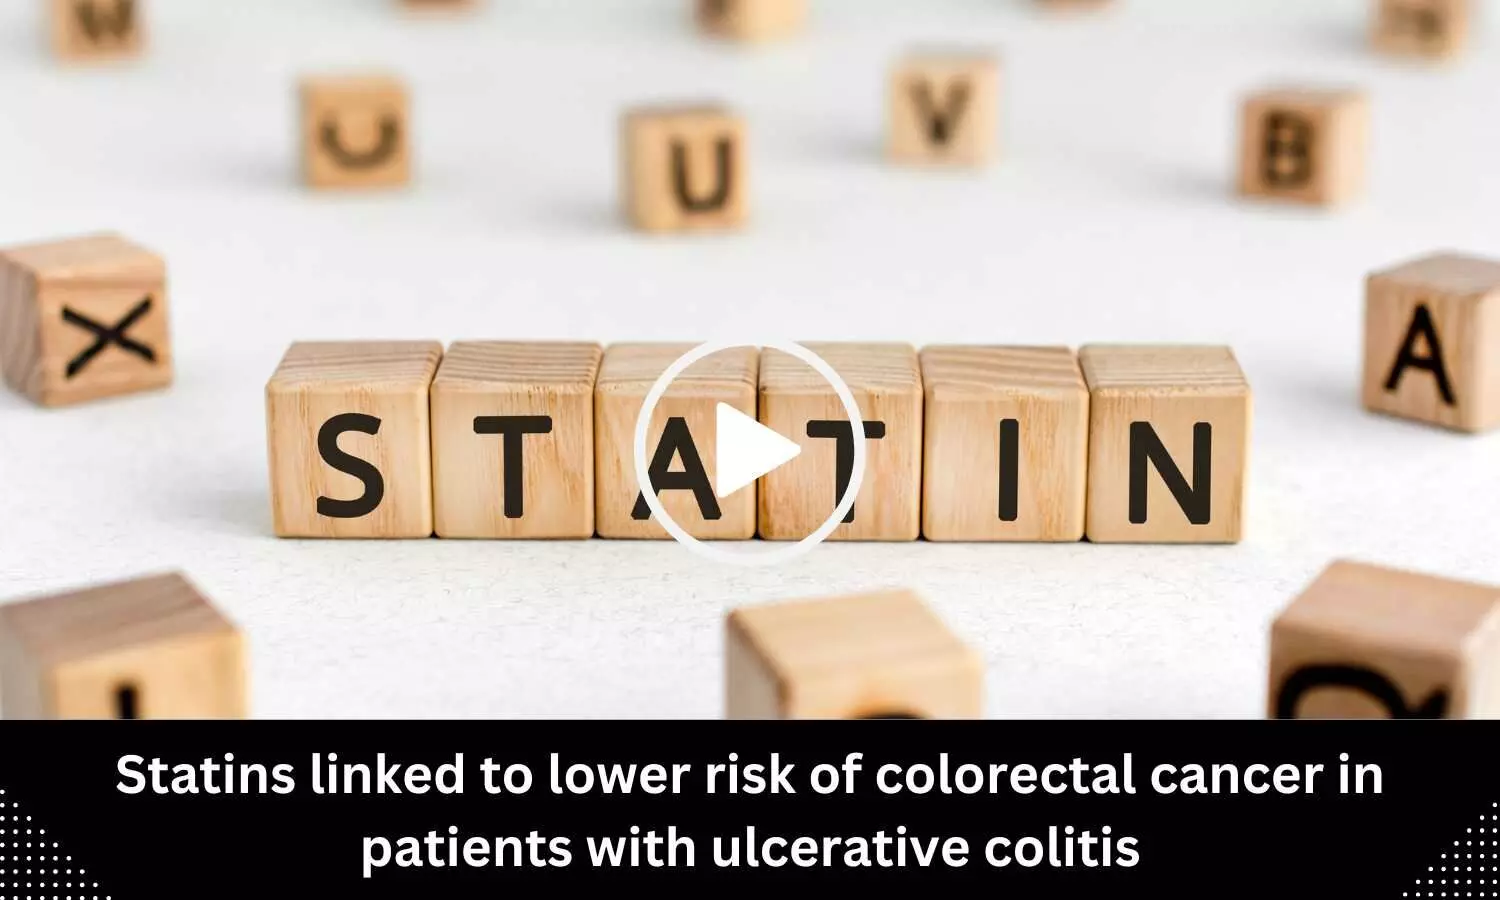 Statins linked to lower risk of colorectal cancer in patients with ulcerative colitis